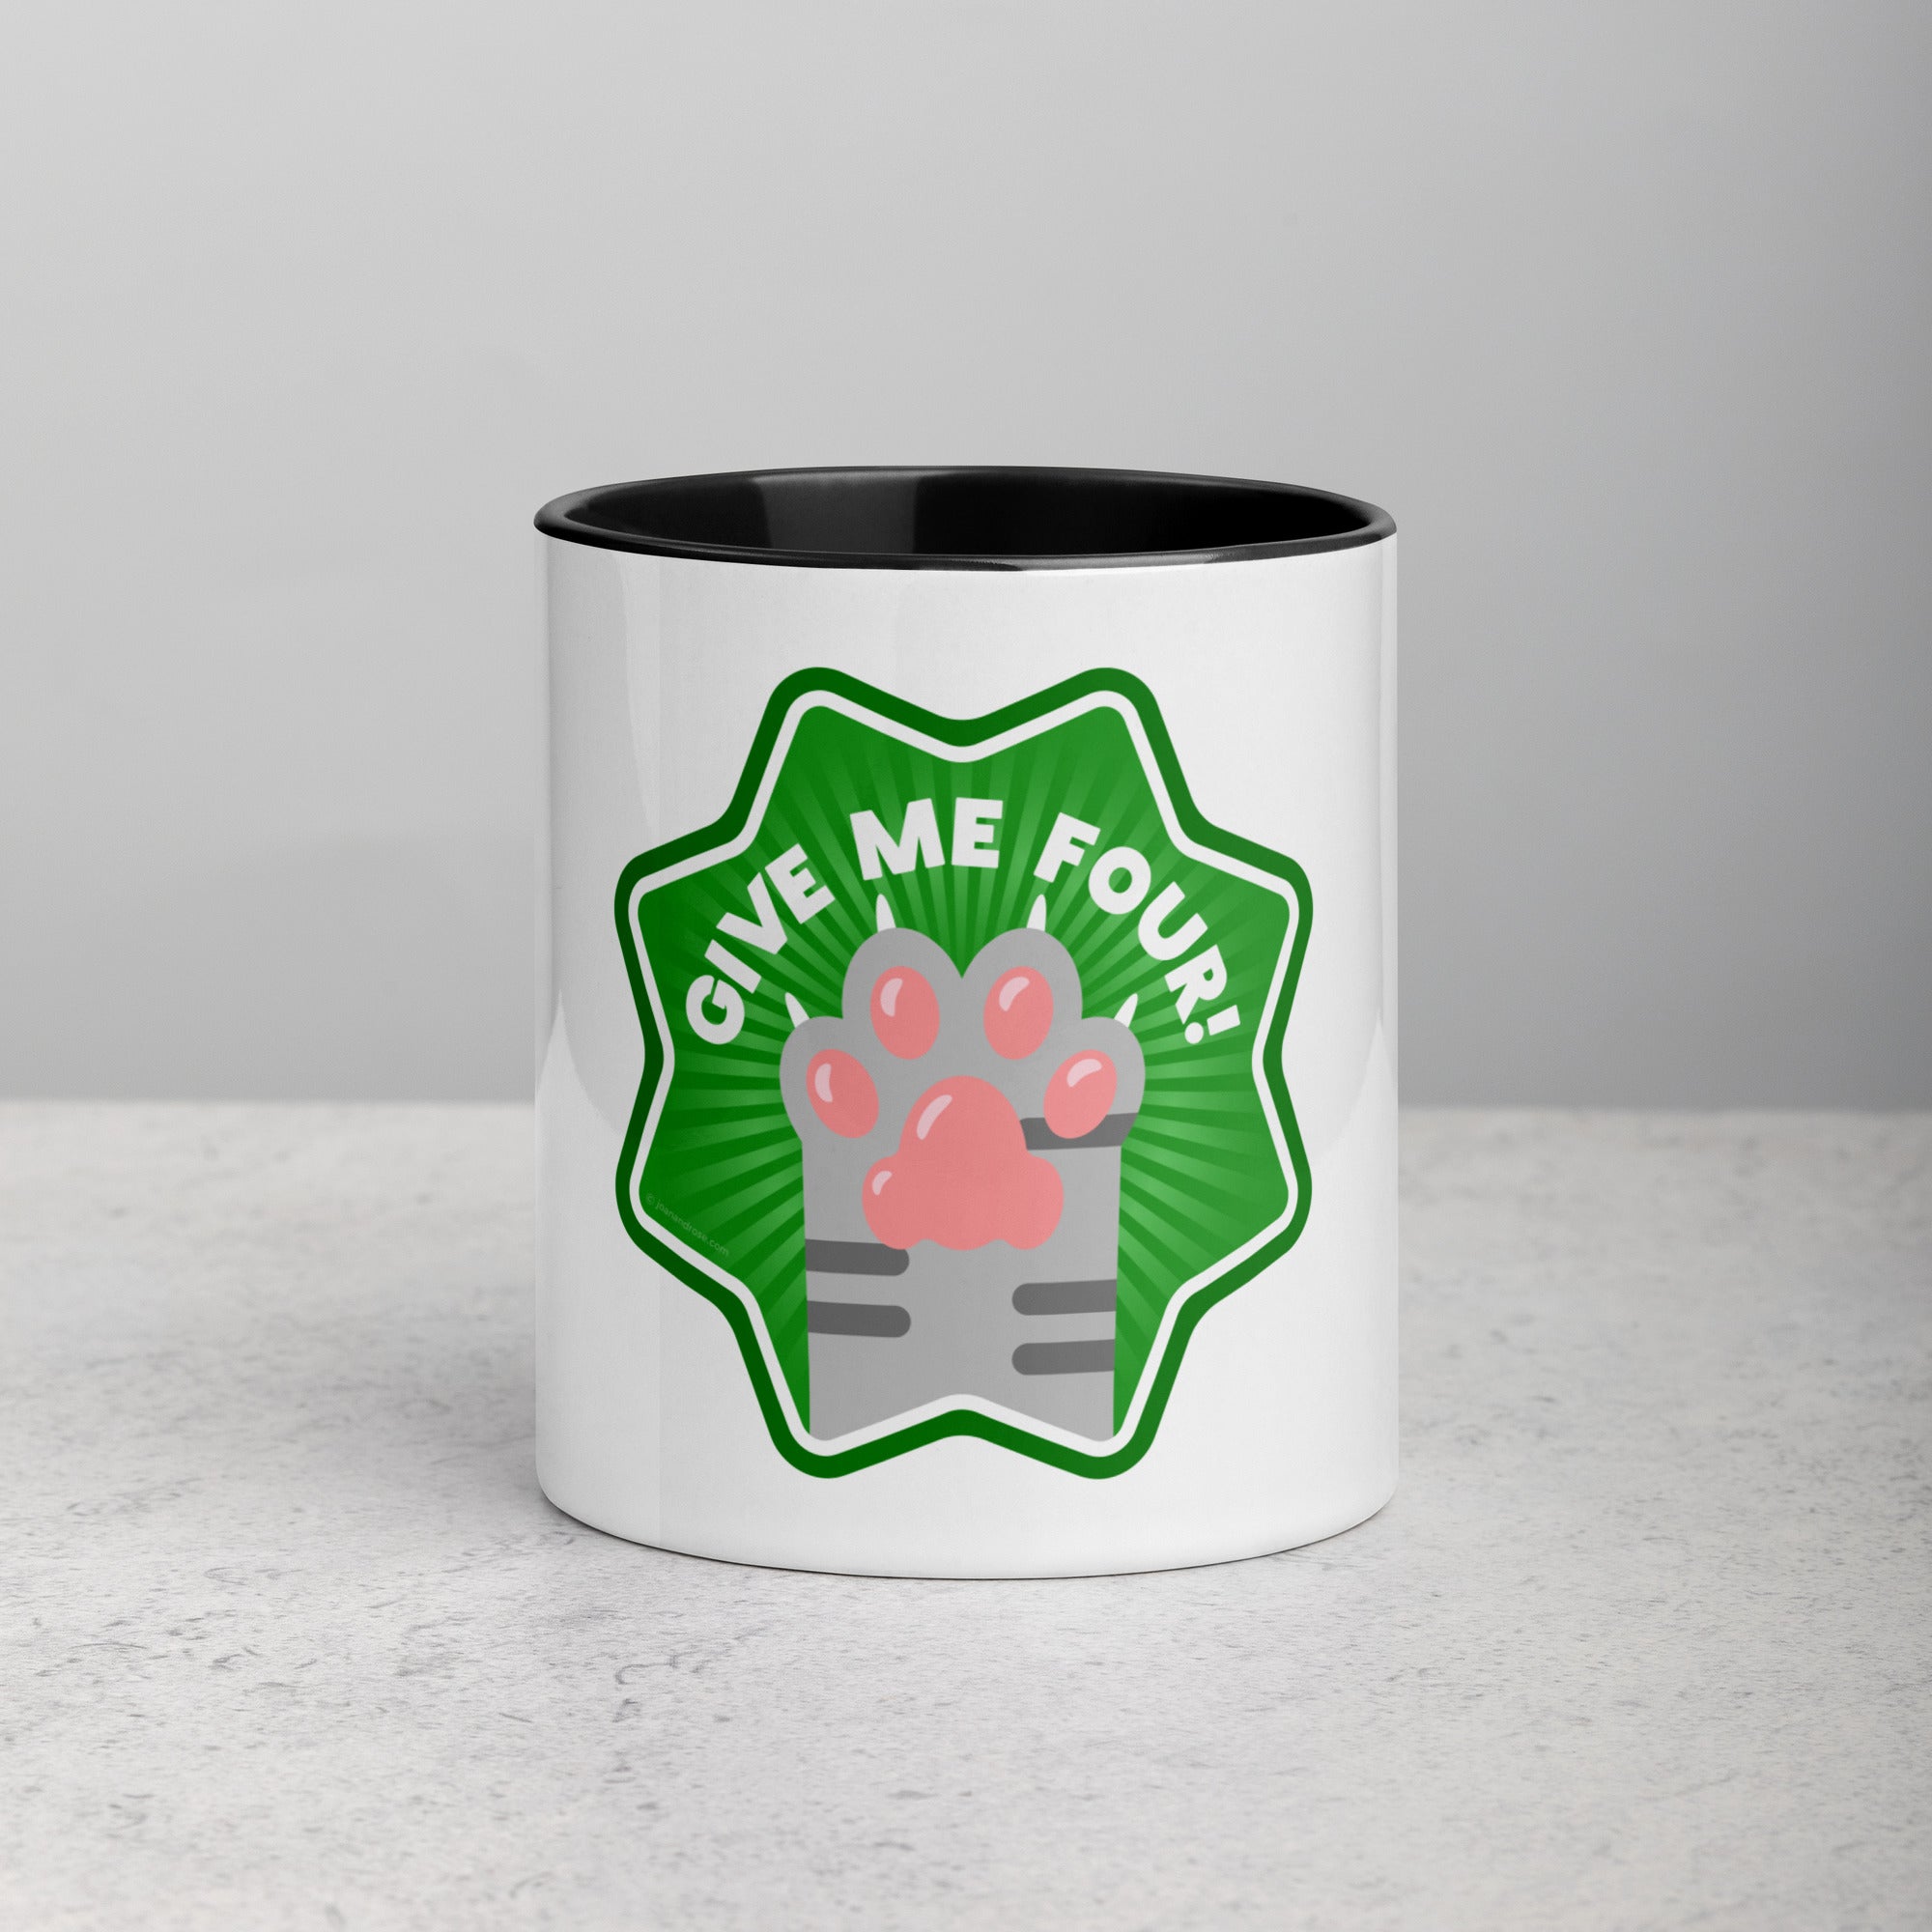 front facing image of a white mug with black interior and handle. Mug has image of a grey tabby cats paw on a green 8 sided star with the text 'give me four' 